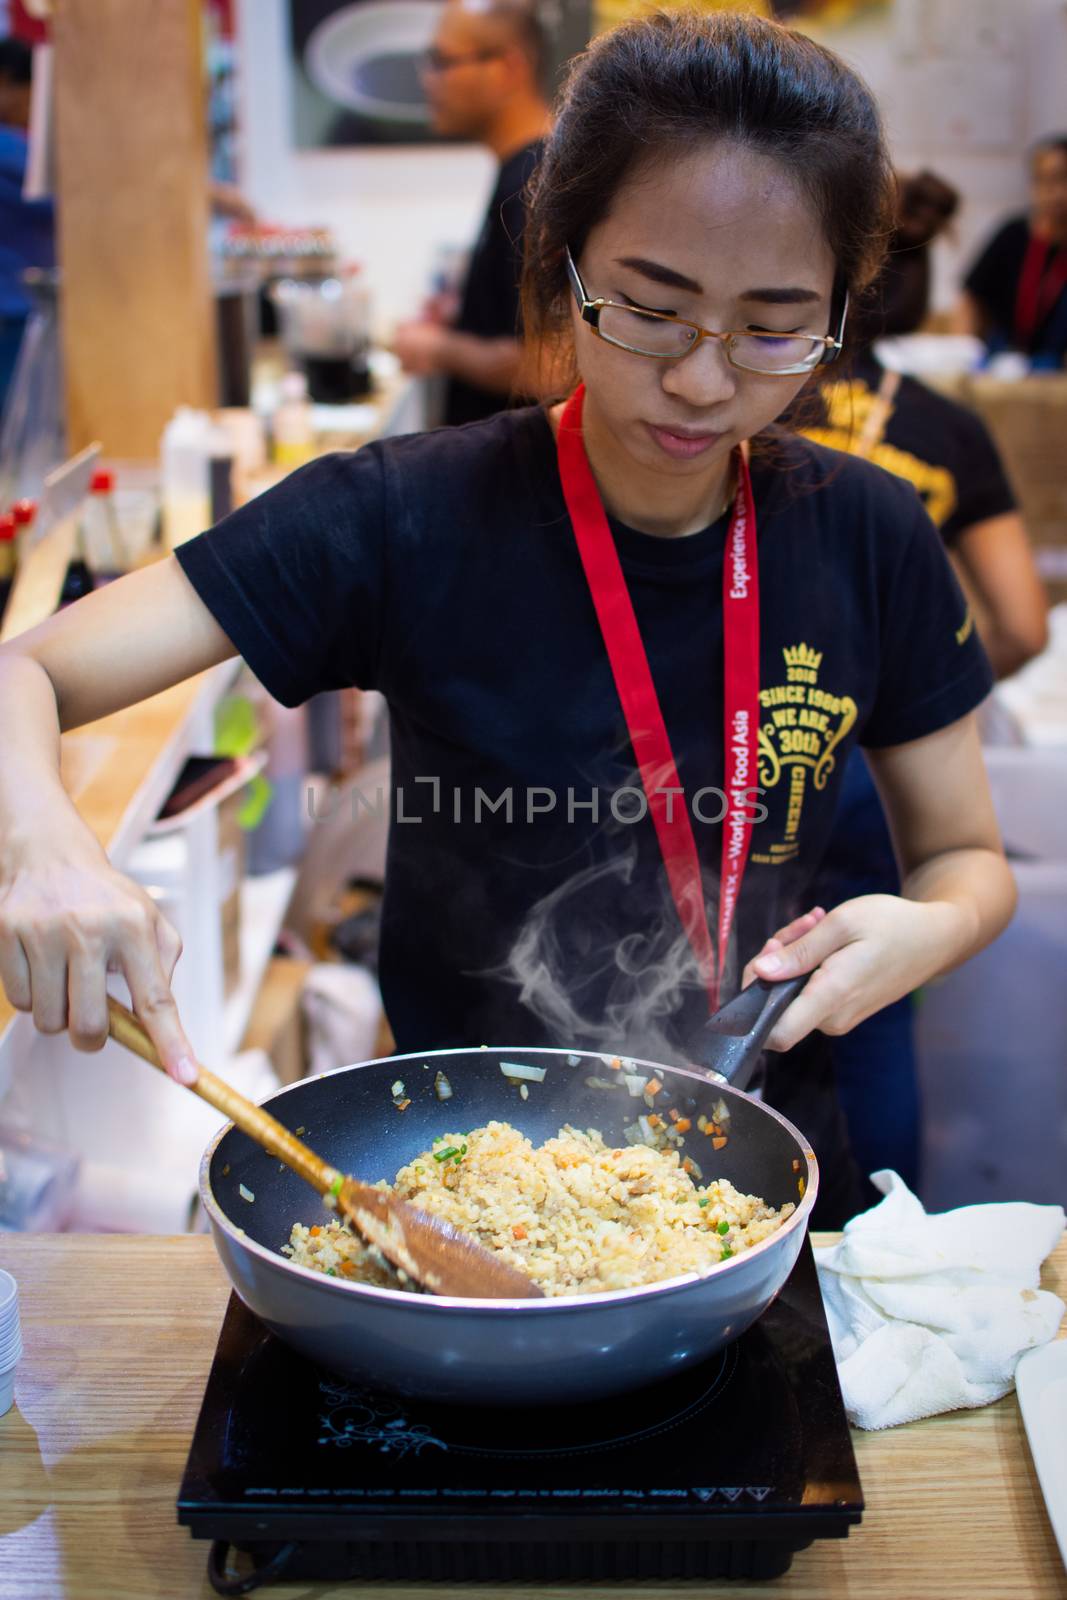 Chef cooking a food for show and sale to customers by PongMoji